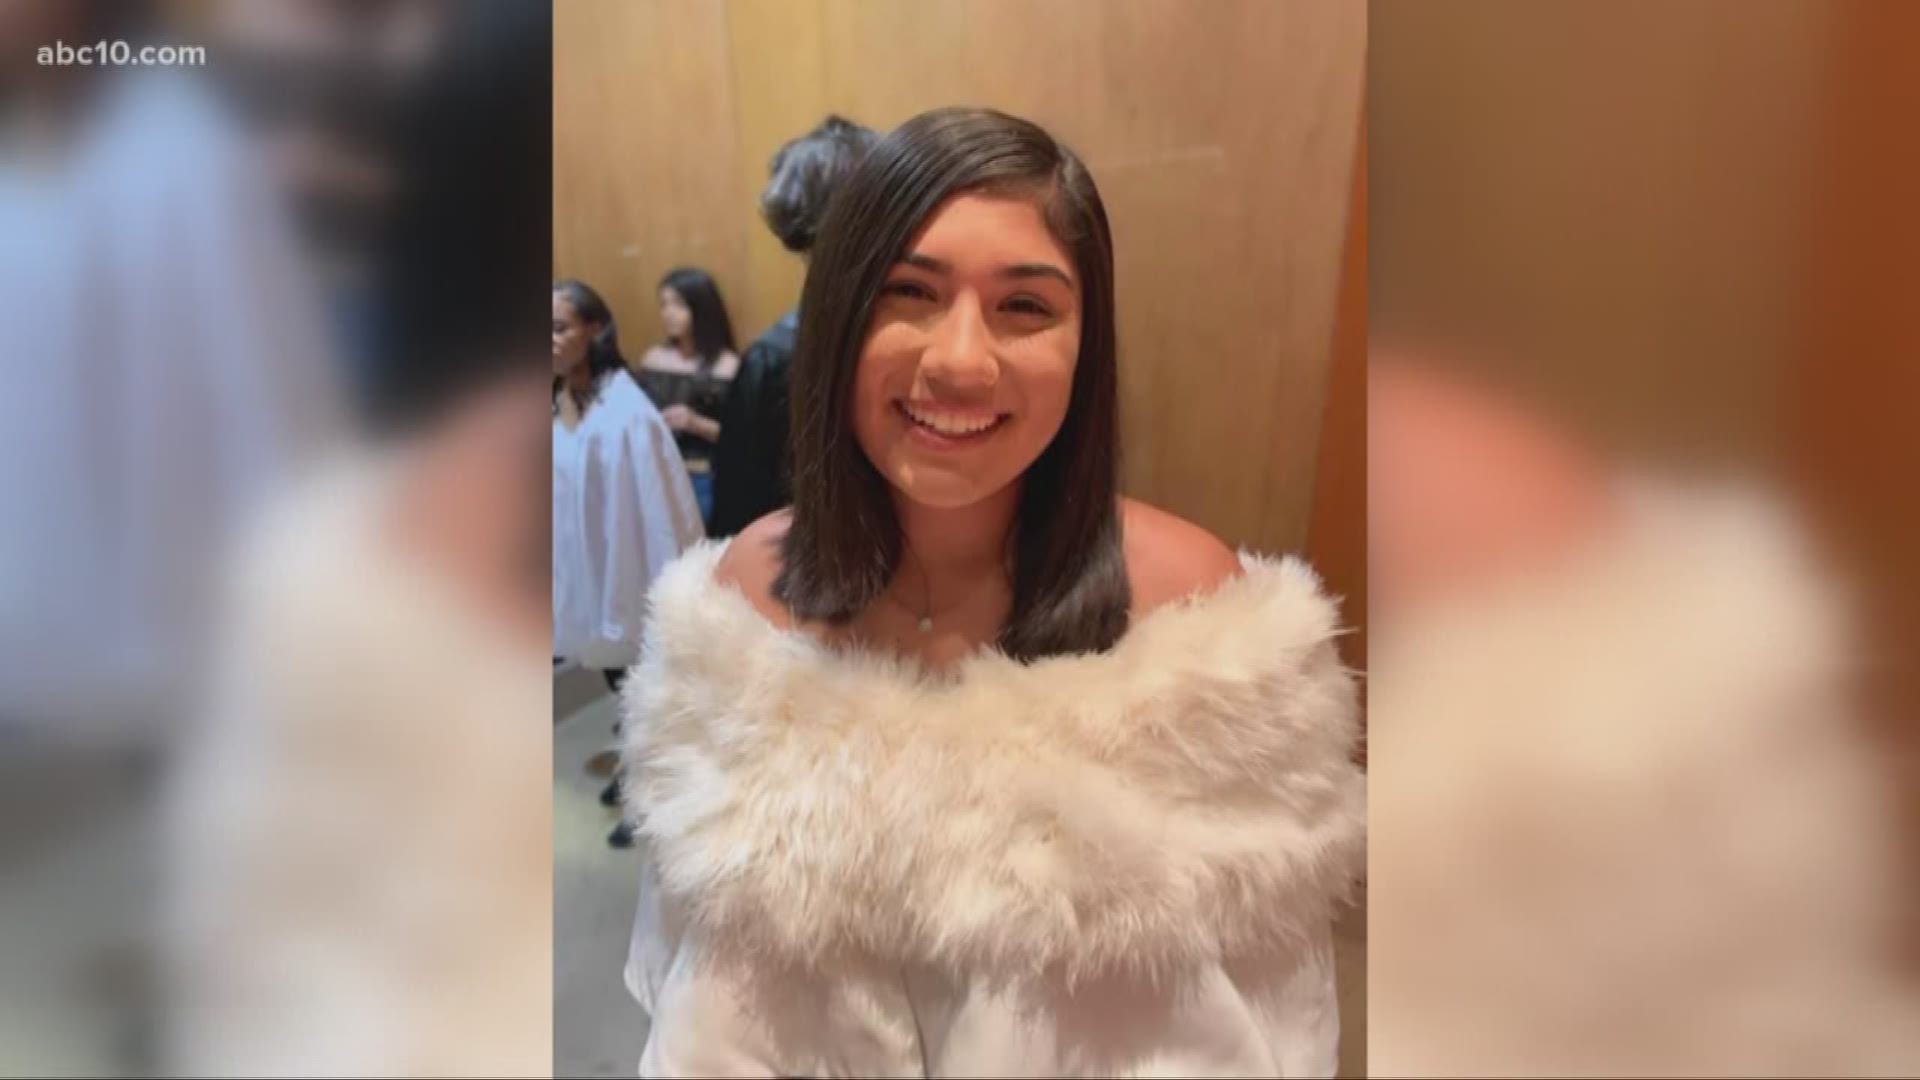 Isabelle is the ABC10 Viewer of the Day for March 27, 2020. If you want to be a viewer of the day text your picture to 916-321-3310.